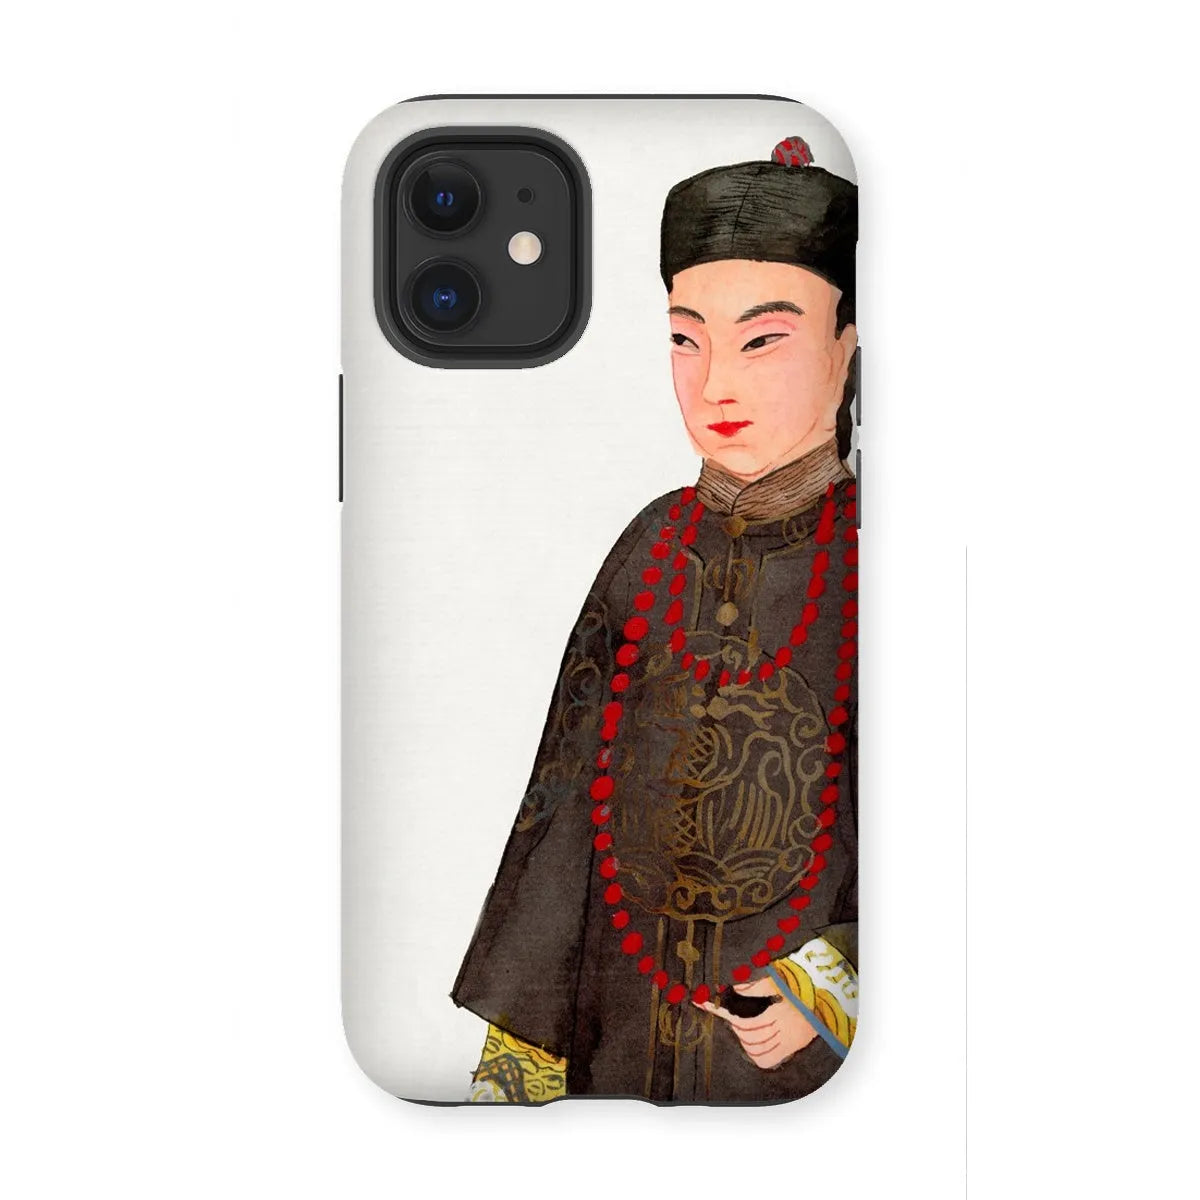 Emperor’s Courtier - Chinese Manchu Aesthetic Art Phone Case - Iphone 12 Mini / Matte - Mobile Phone Cases